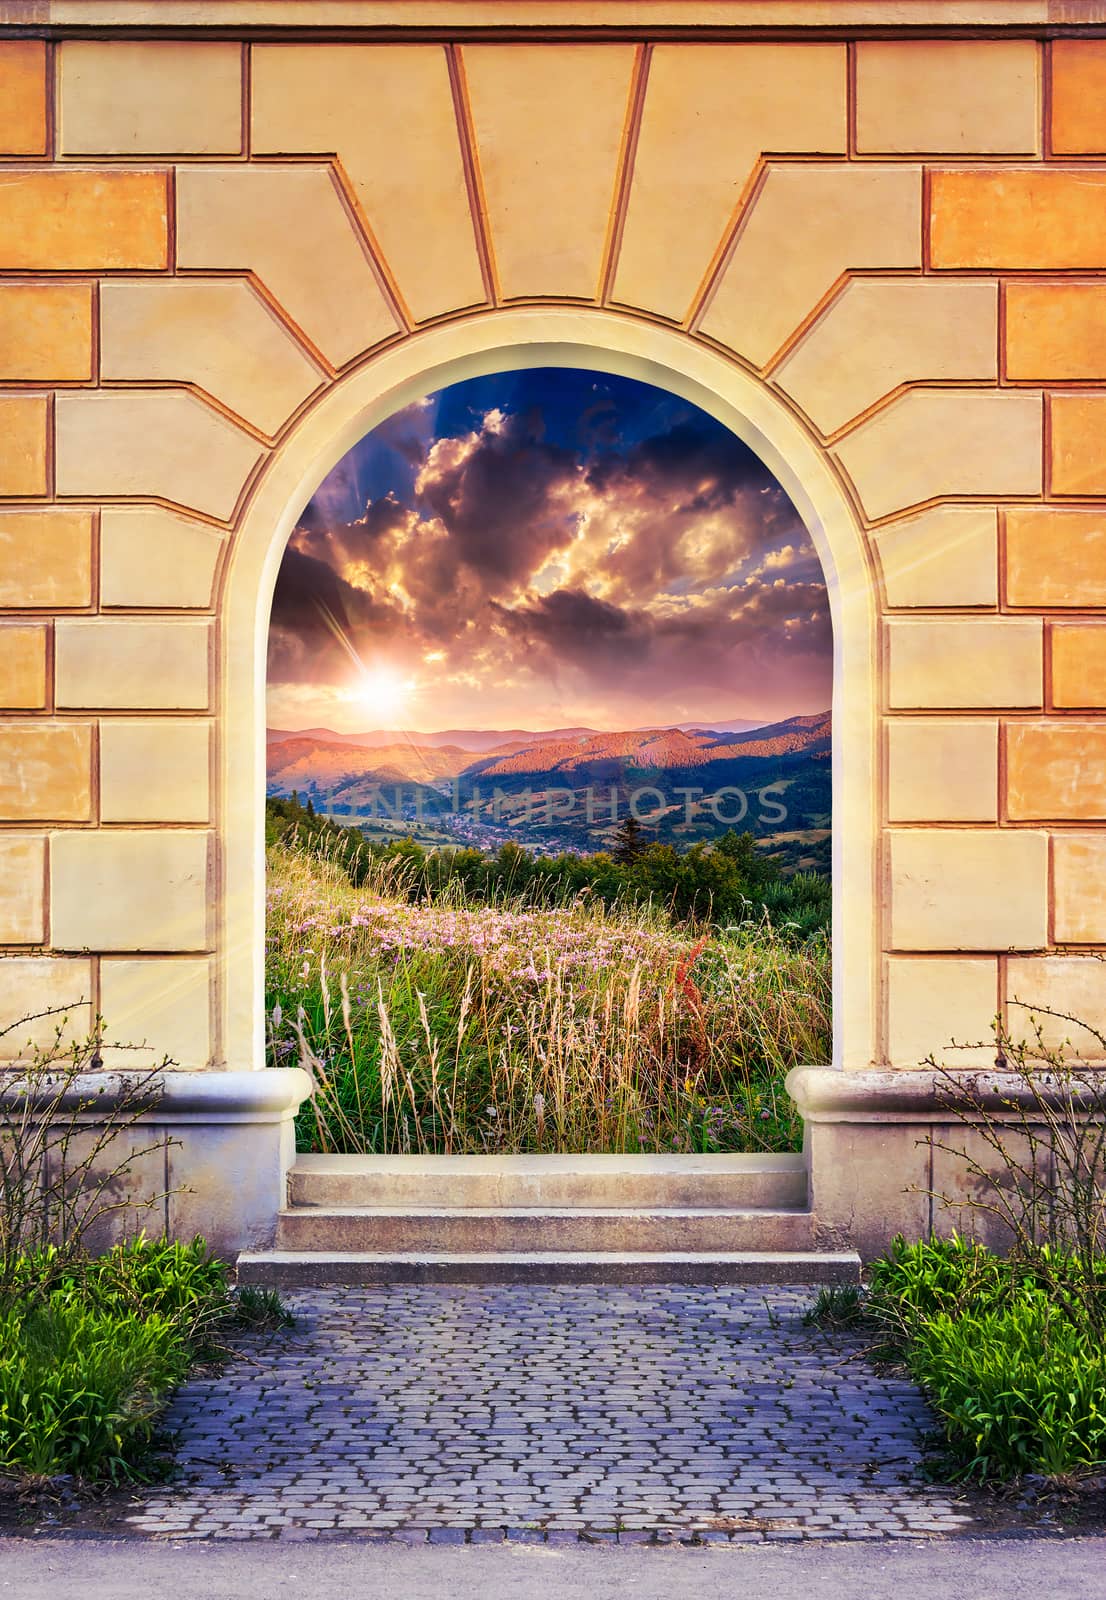 Frame of desolate immured door with picture of mountain meadow on sunrise and steps of cut stone